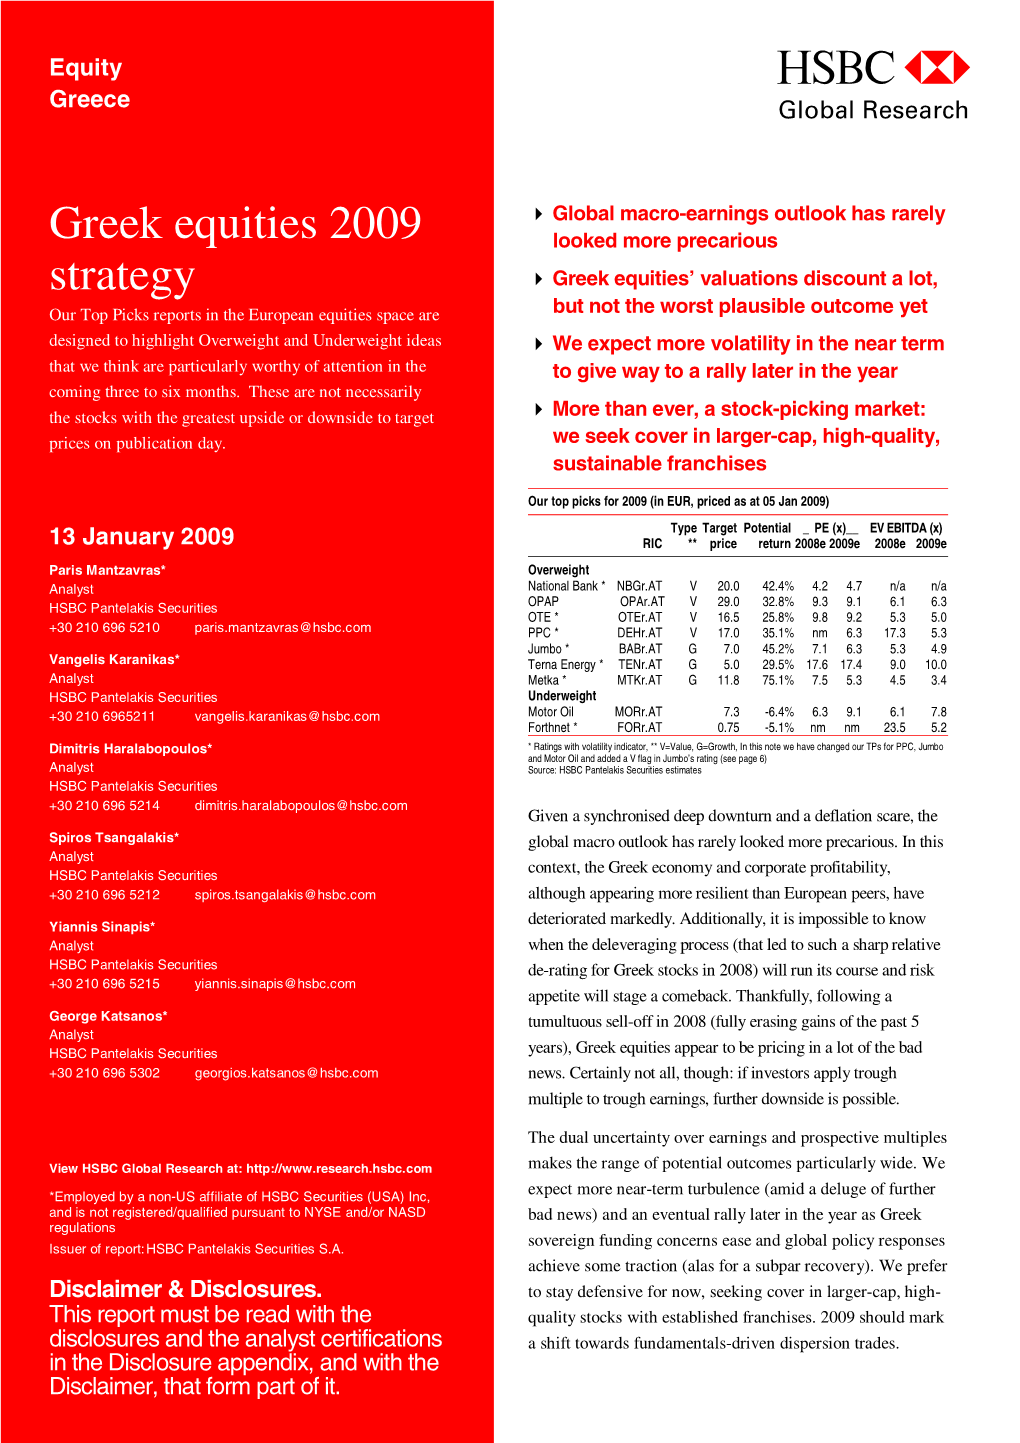 Greek Equities 2009 Strategy-Our Top Picks Reports in the European